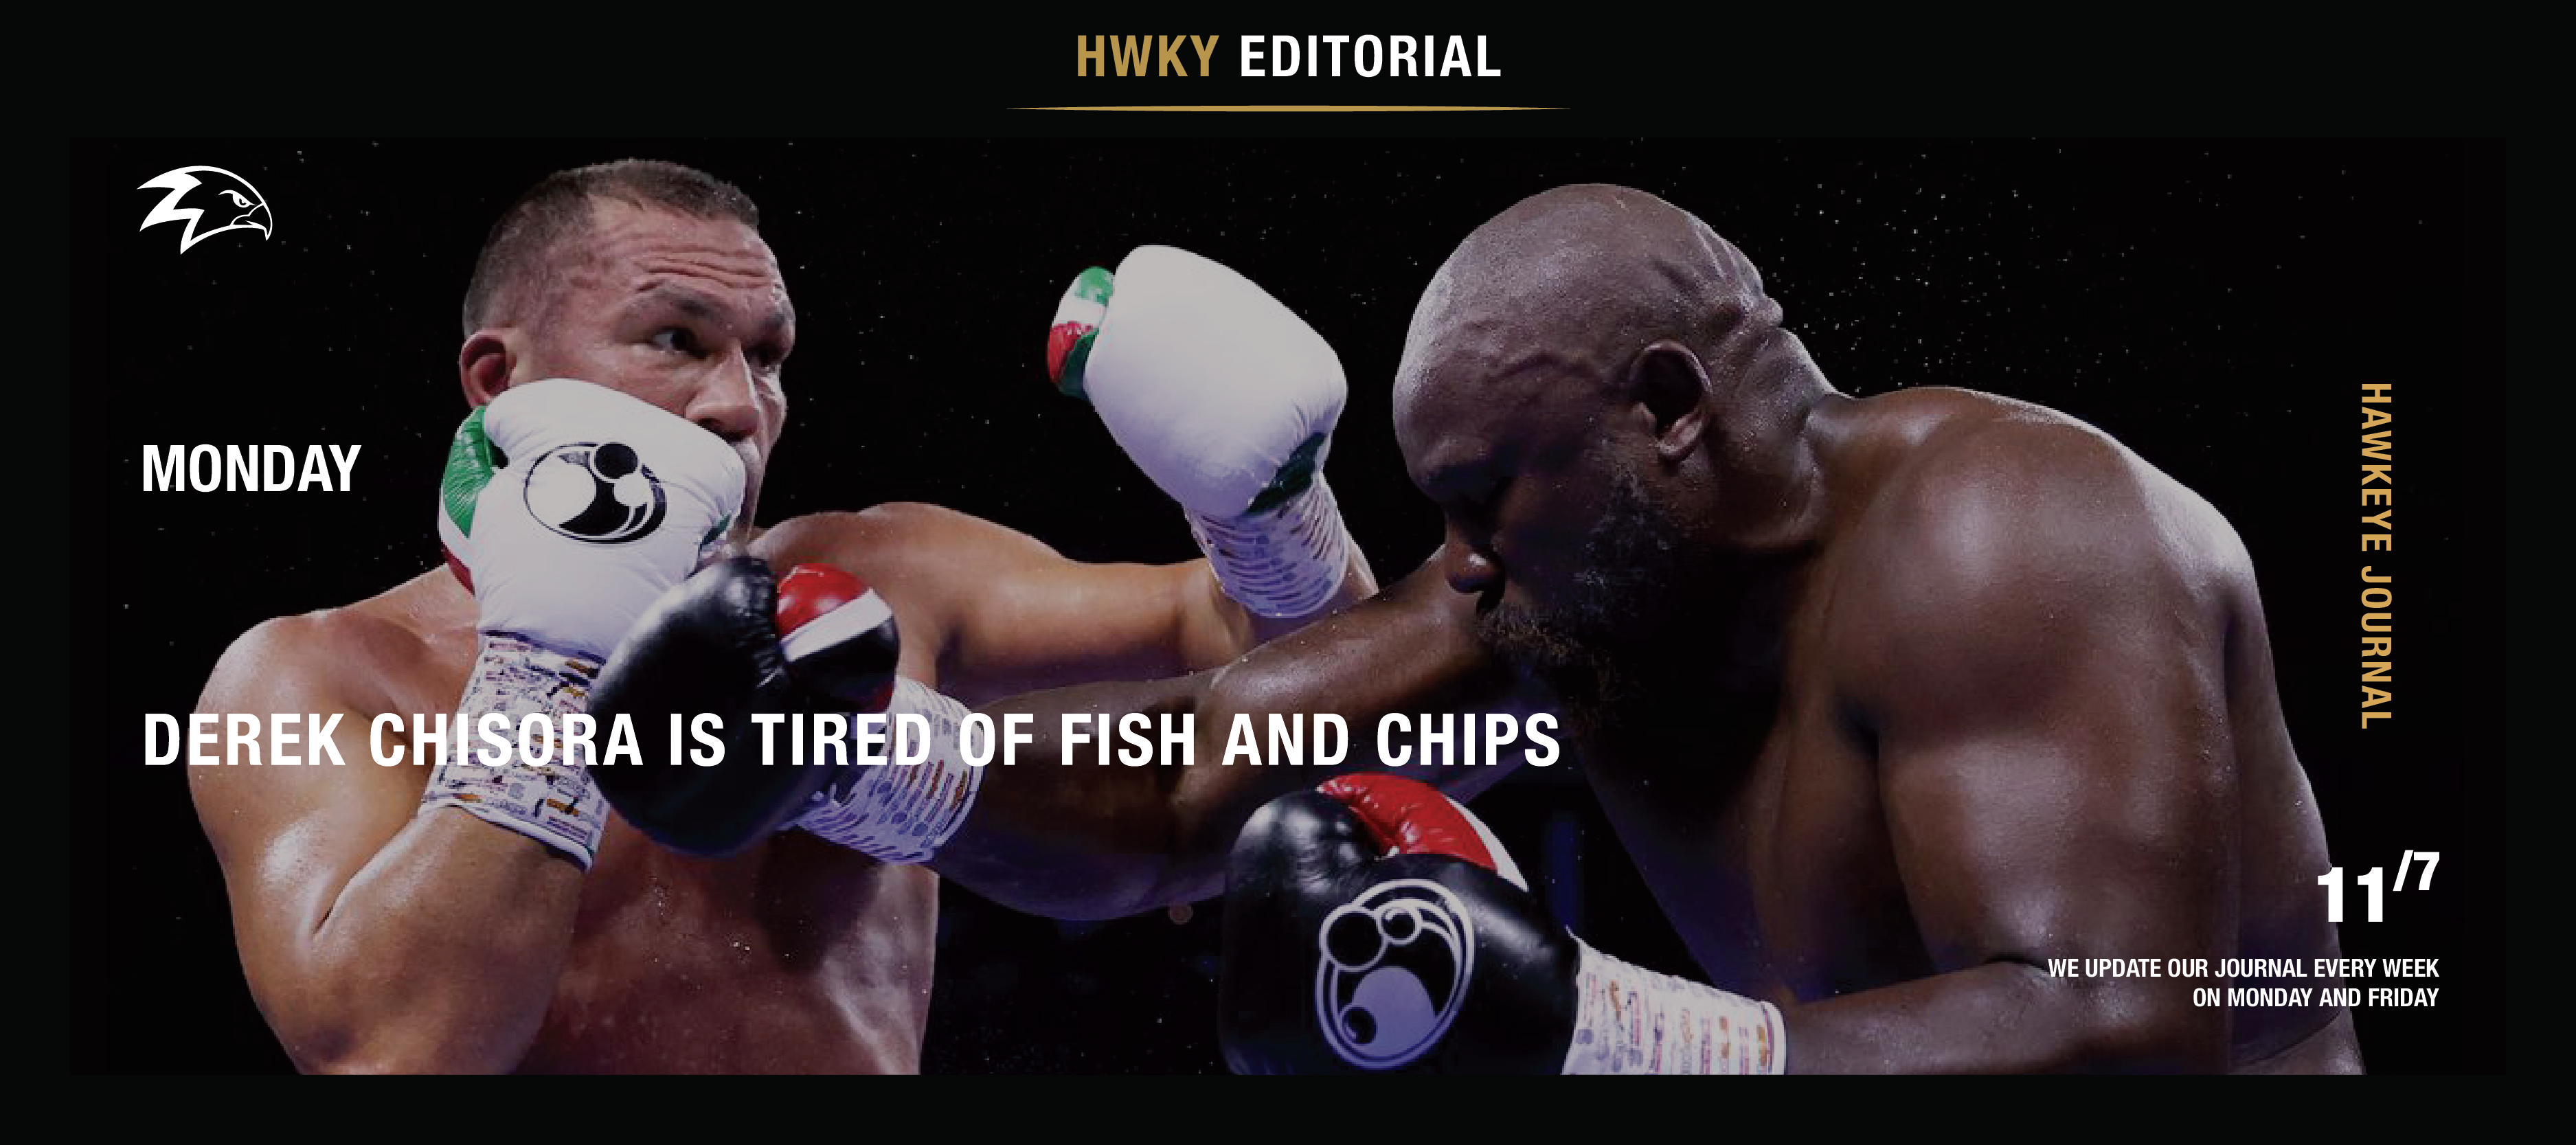 Derek Chisora Is Tired Of Fish And Chips